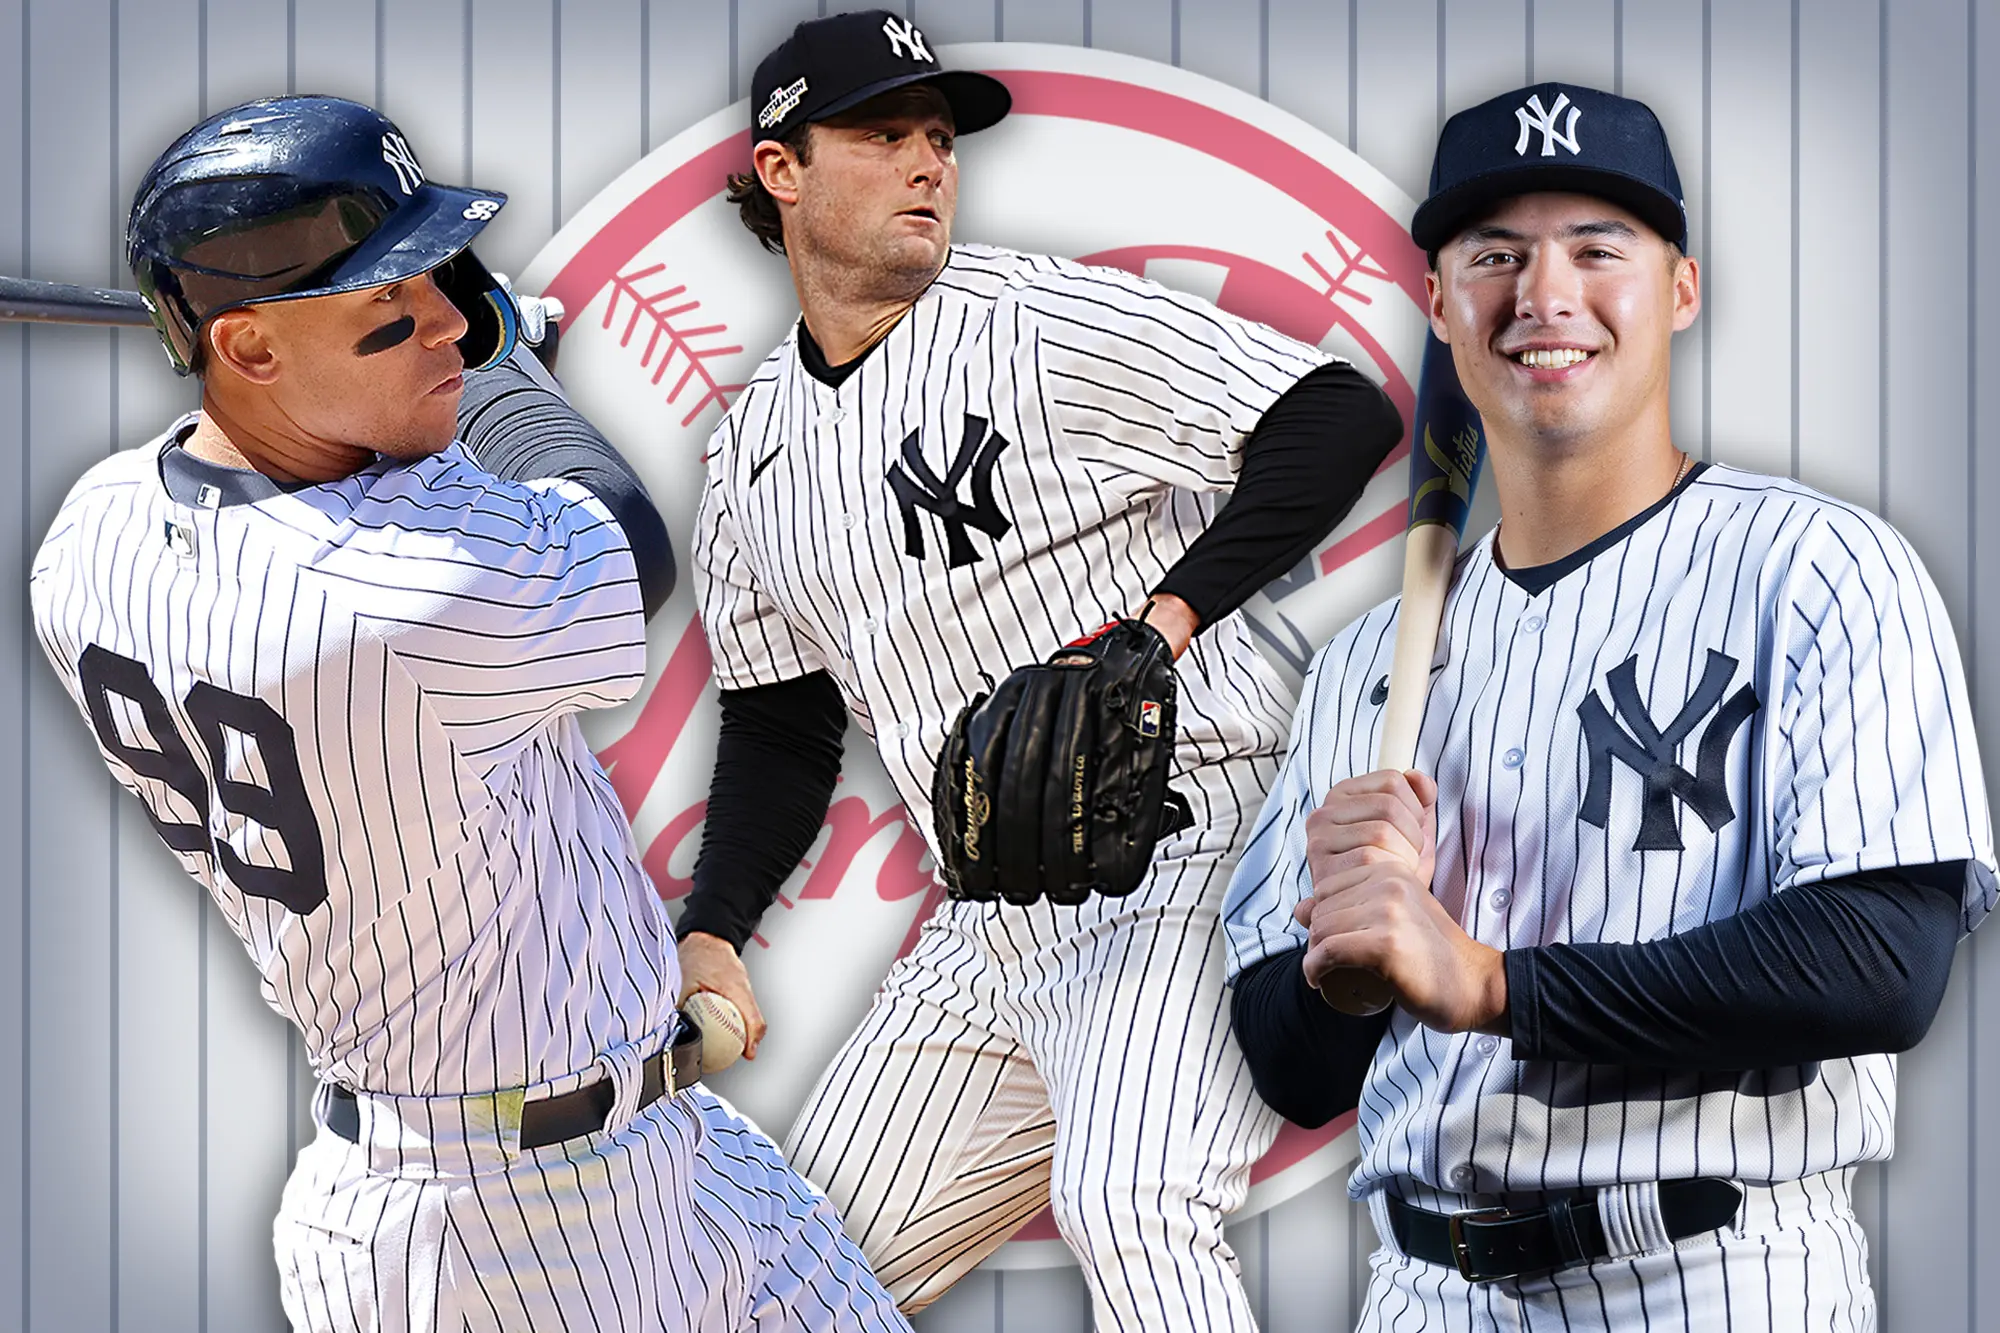 20 Yankees games will be available to stream exclusively on Prime Video